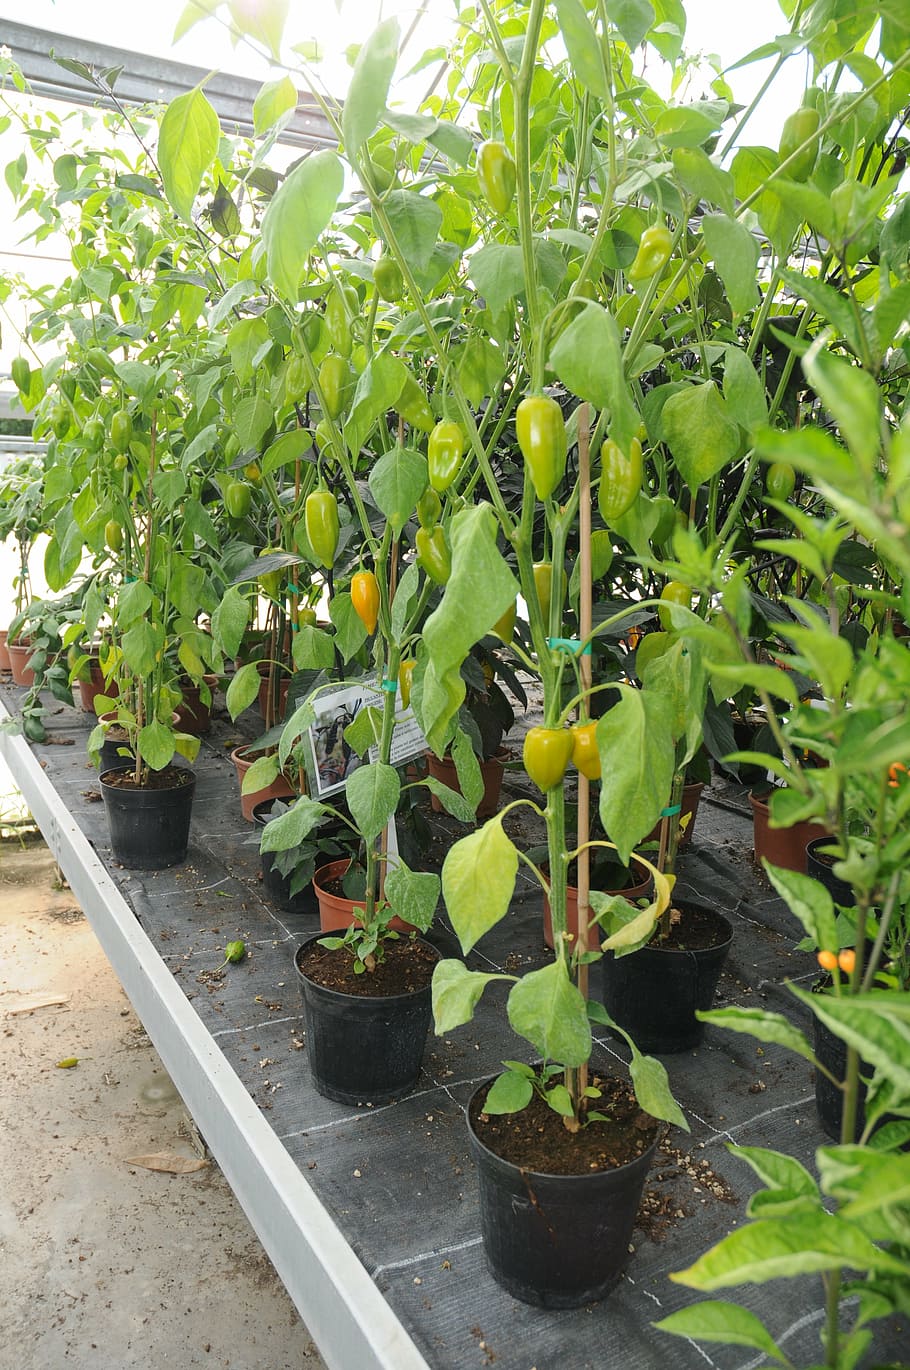 chilli peppers, marco, serra, growth, plant, green color, nature, leaf, plant part, potted plant